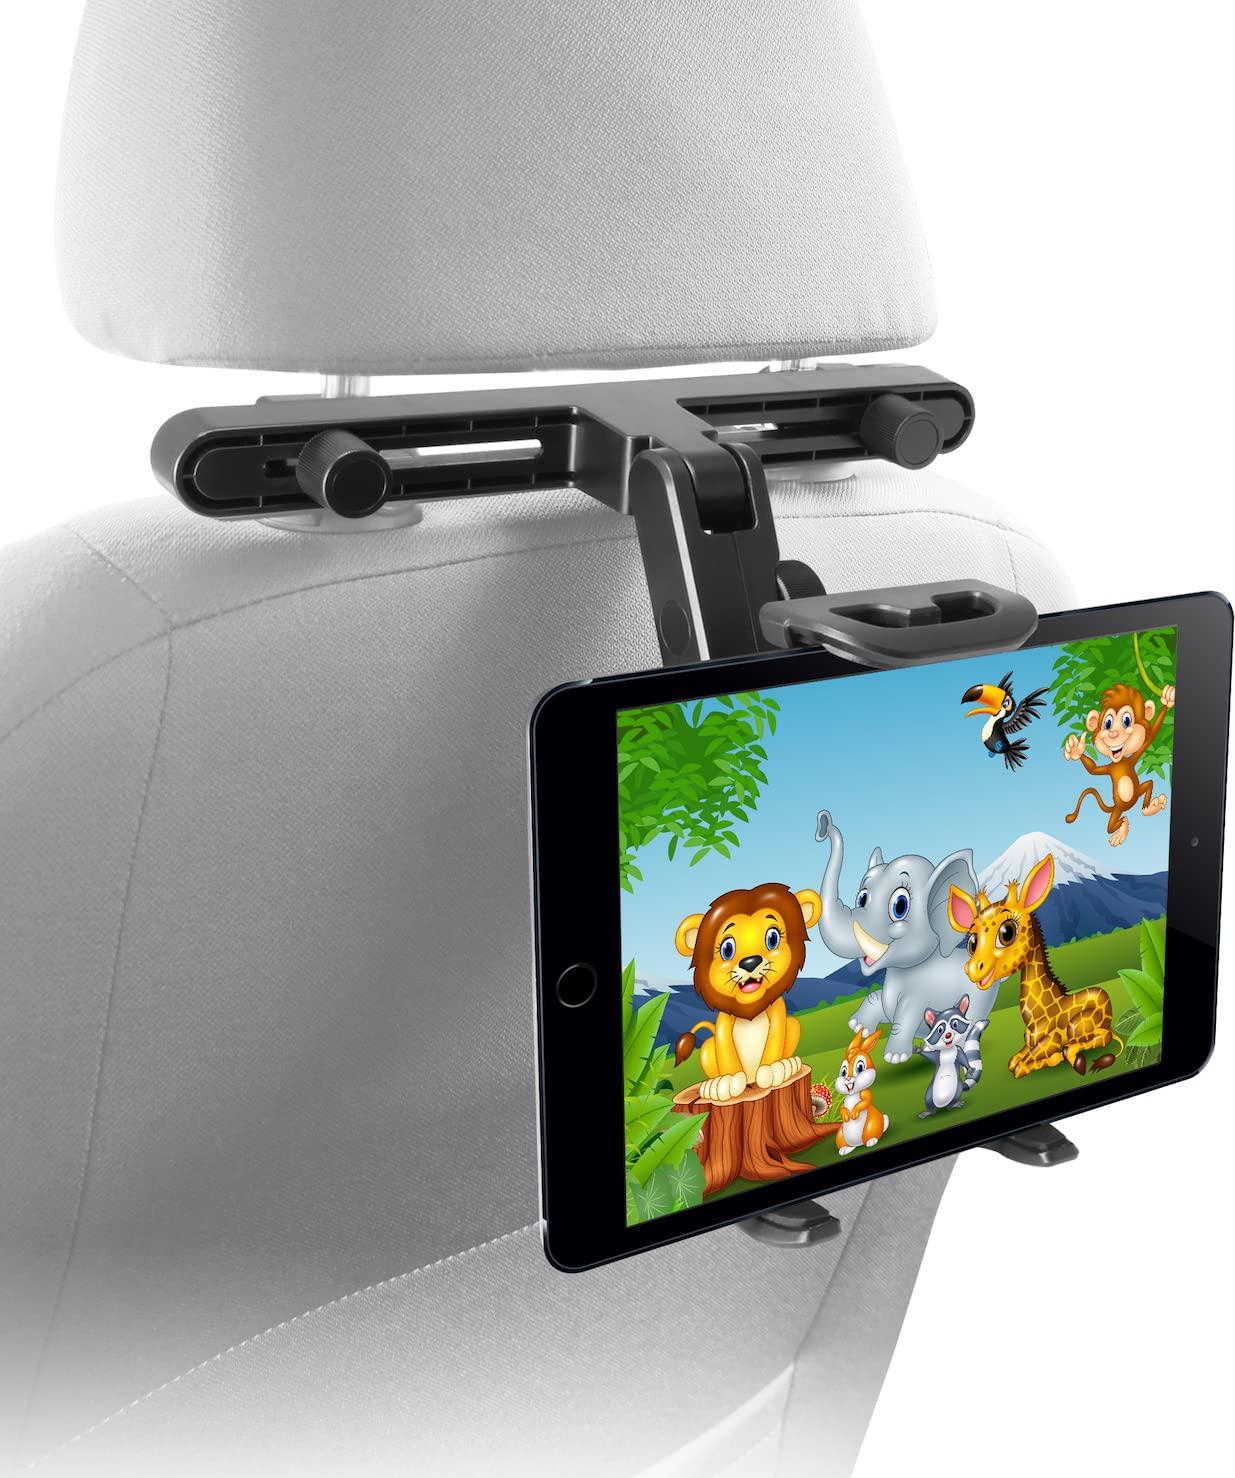 Macally, Macally Car Headrest Tablet Holder, Adjustable iPad Car Mount for Kids in Backseat, Compatible with Devices Such as iPad Pro Air Mini, Galaxy Tabs, and 7 to 10 Tablets and Cell Phones - Black